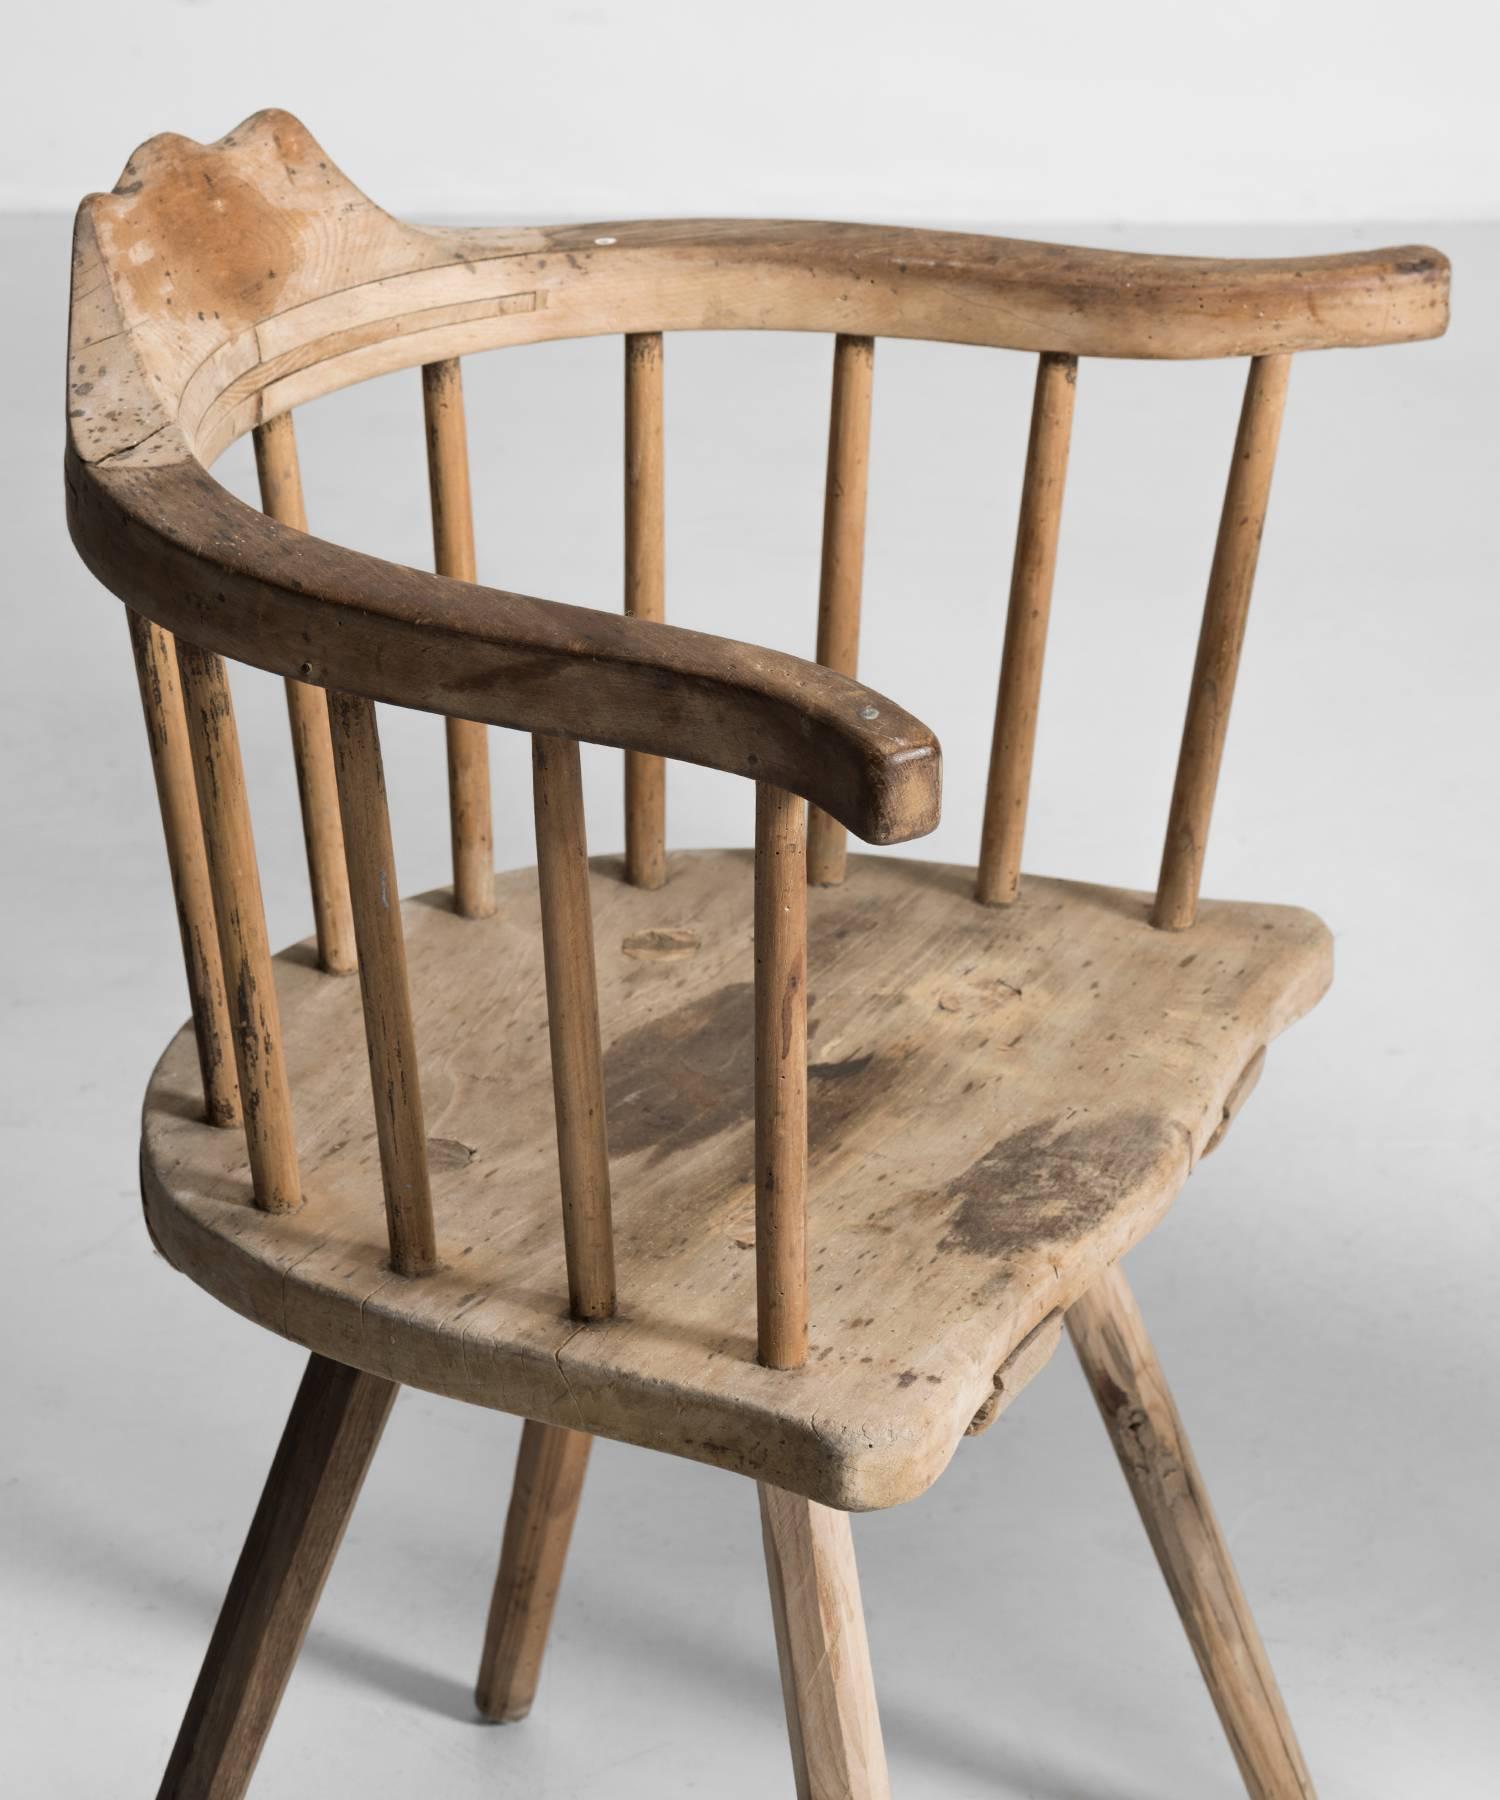 French Primitive Windsor Chair, circa 1880